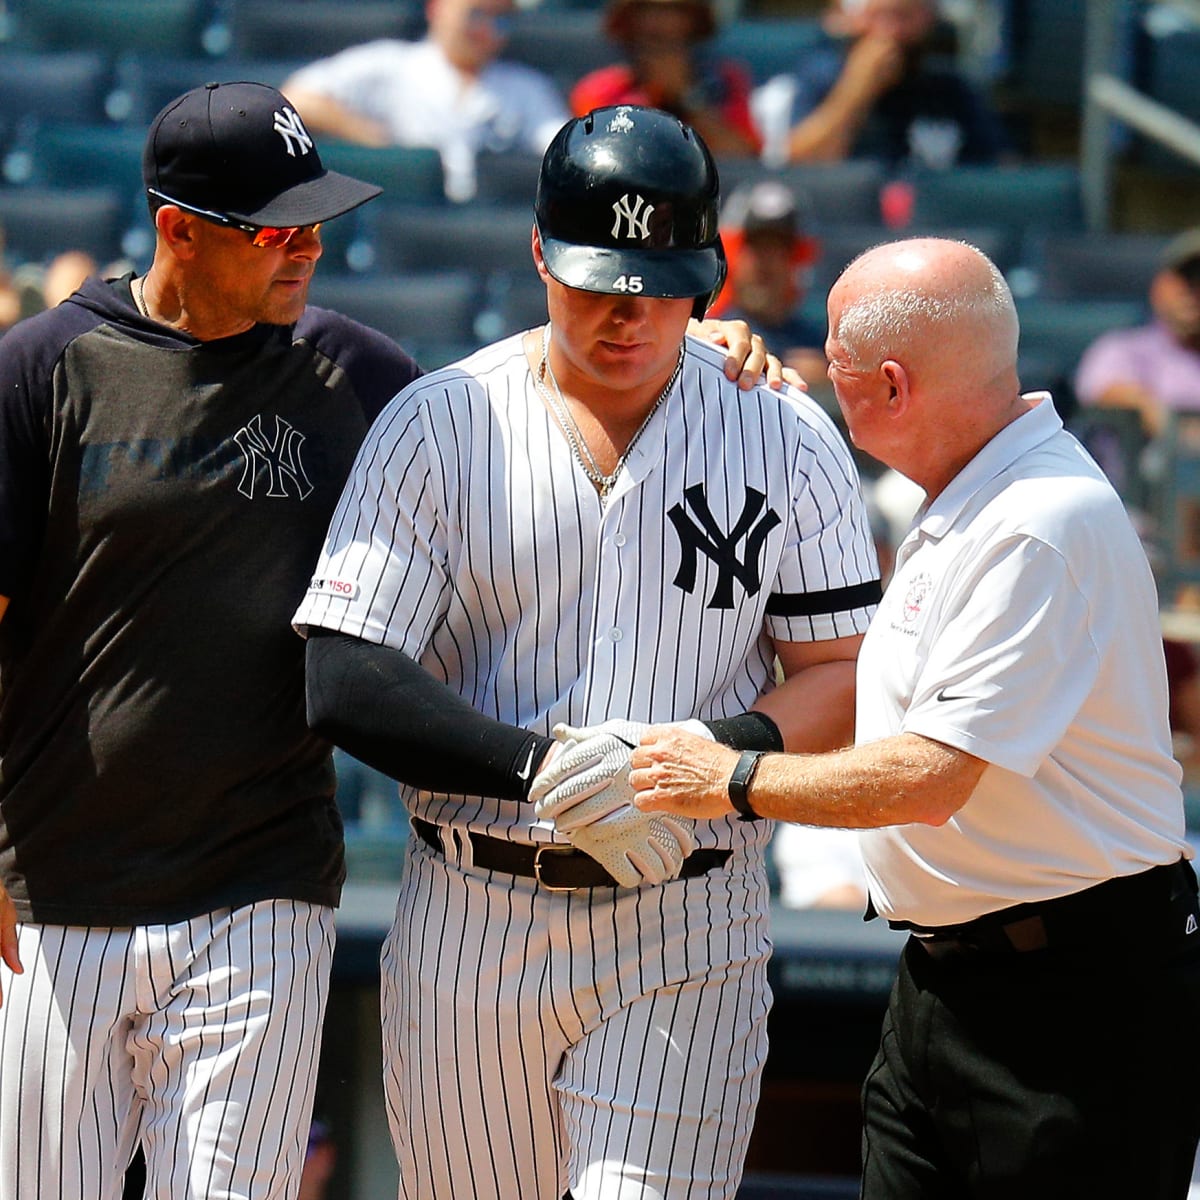 Yankees players itching to start spring training amid COVID concerns 